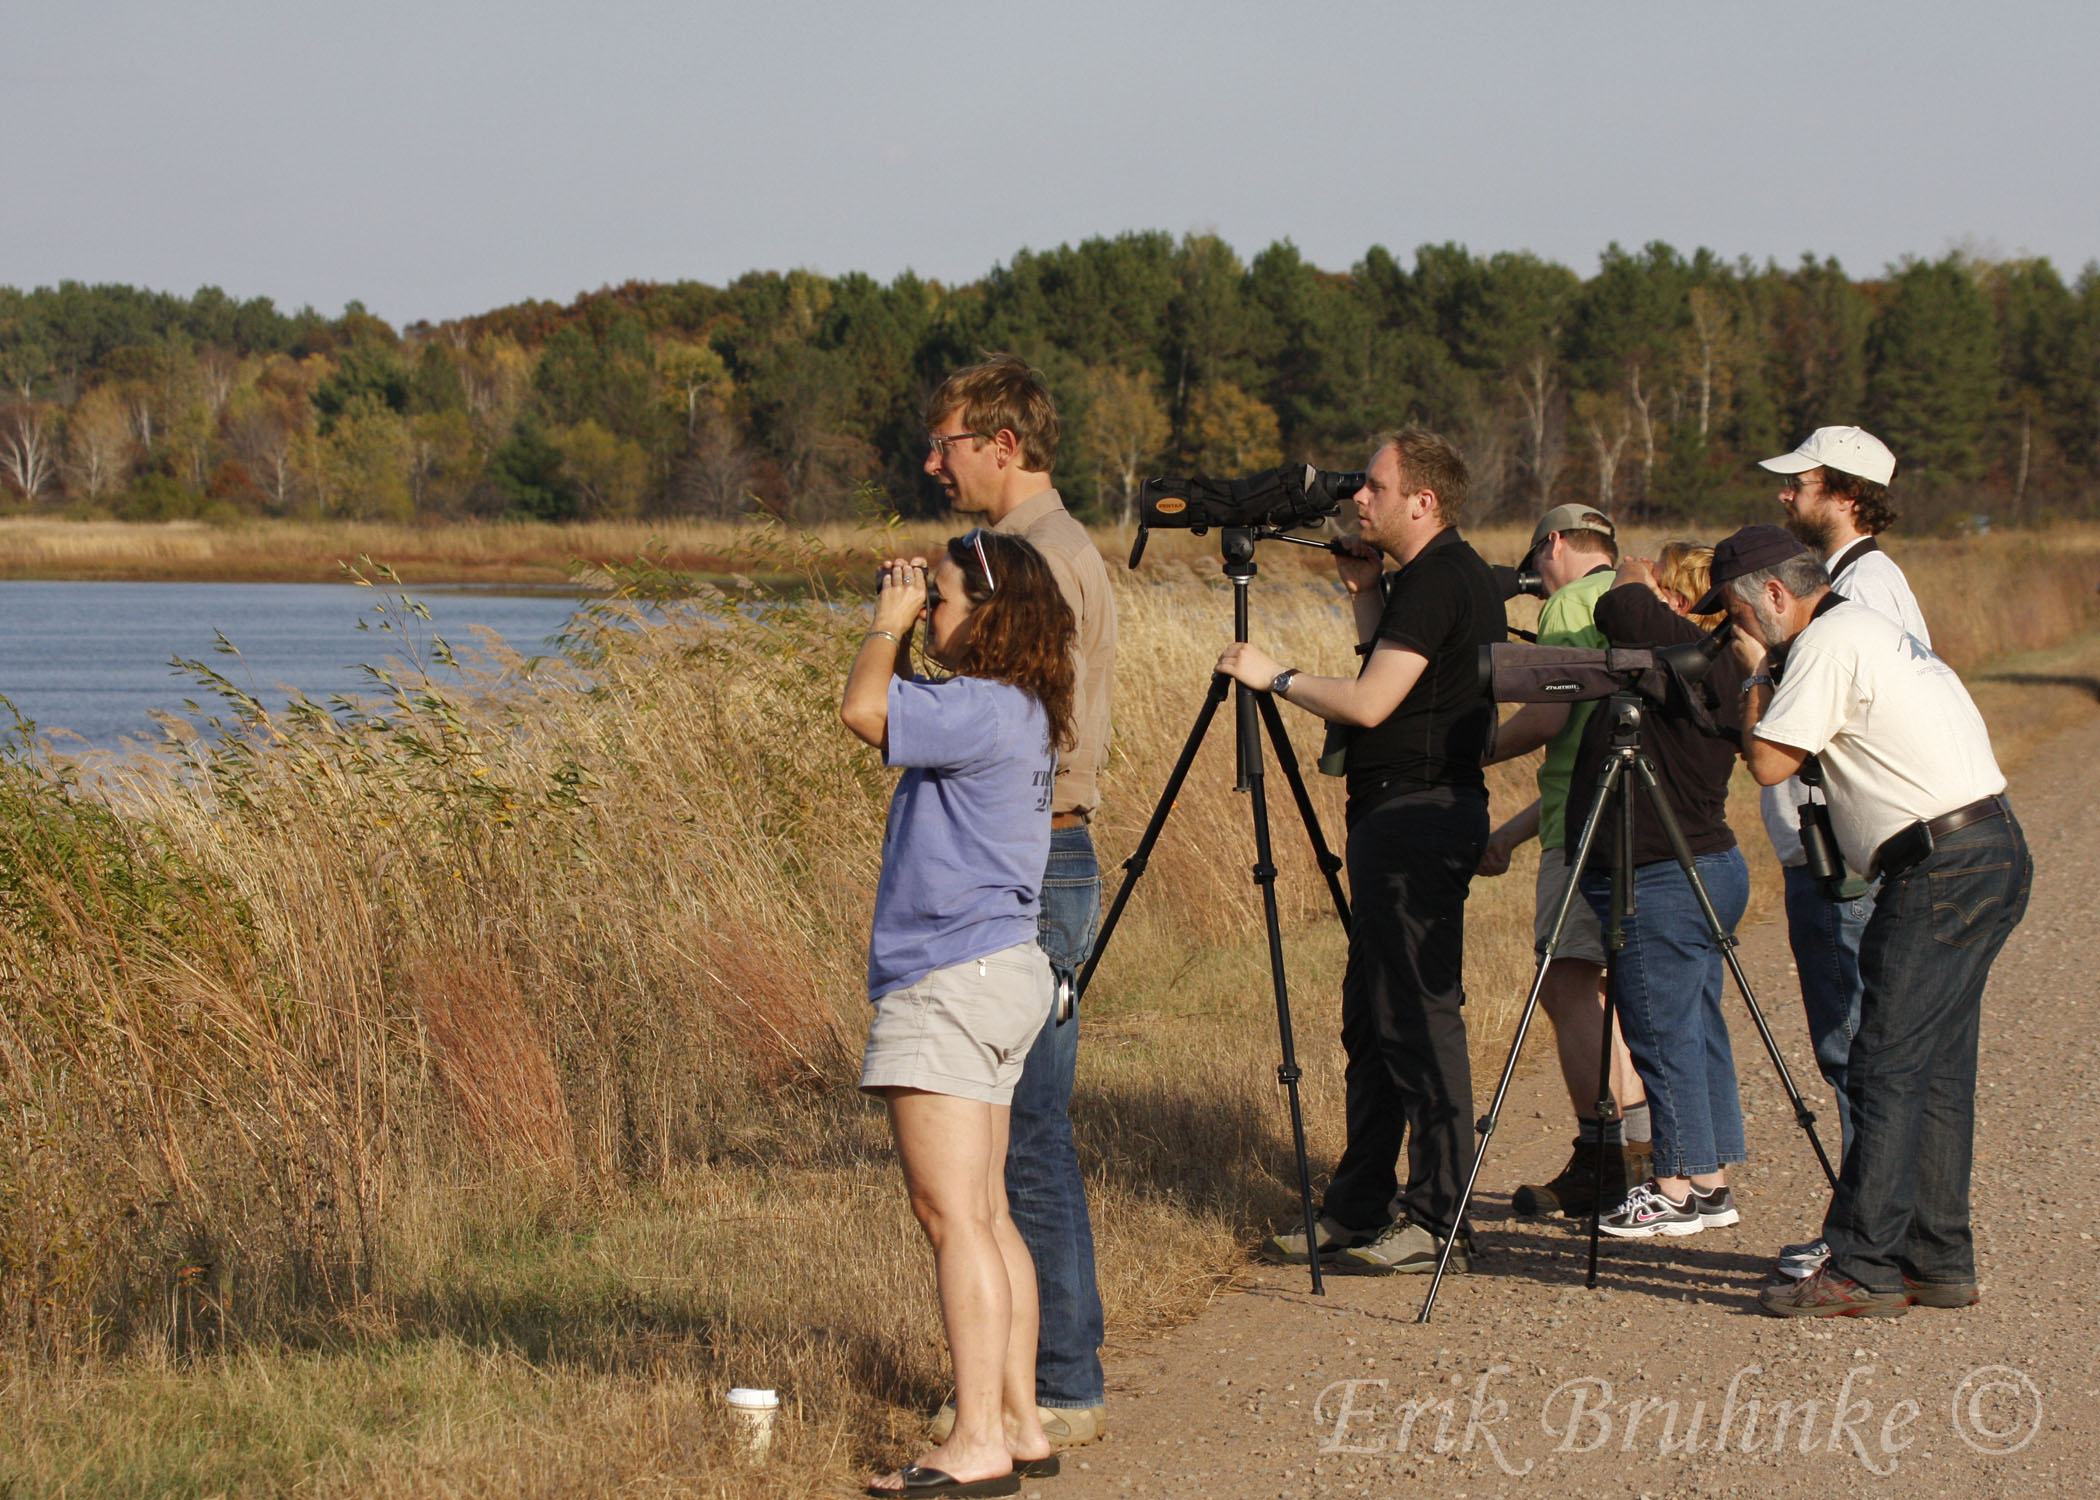 My birding group coming from around the world, to enjoy the birds and amazing views at Crex Meadows!!